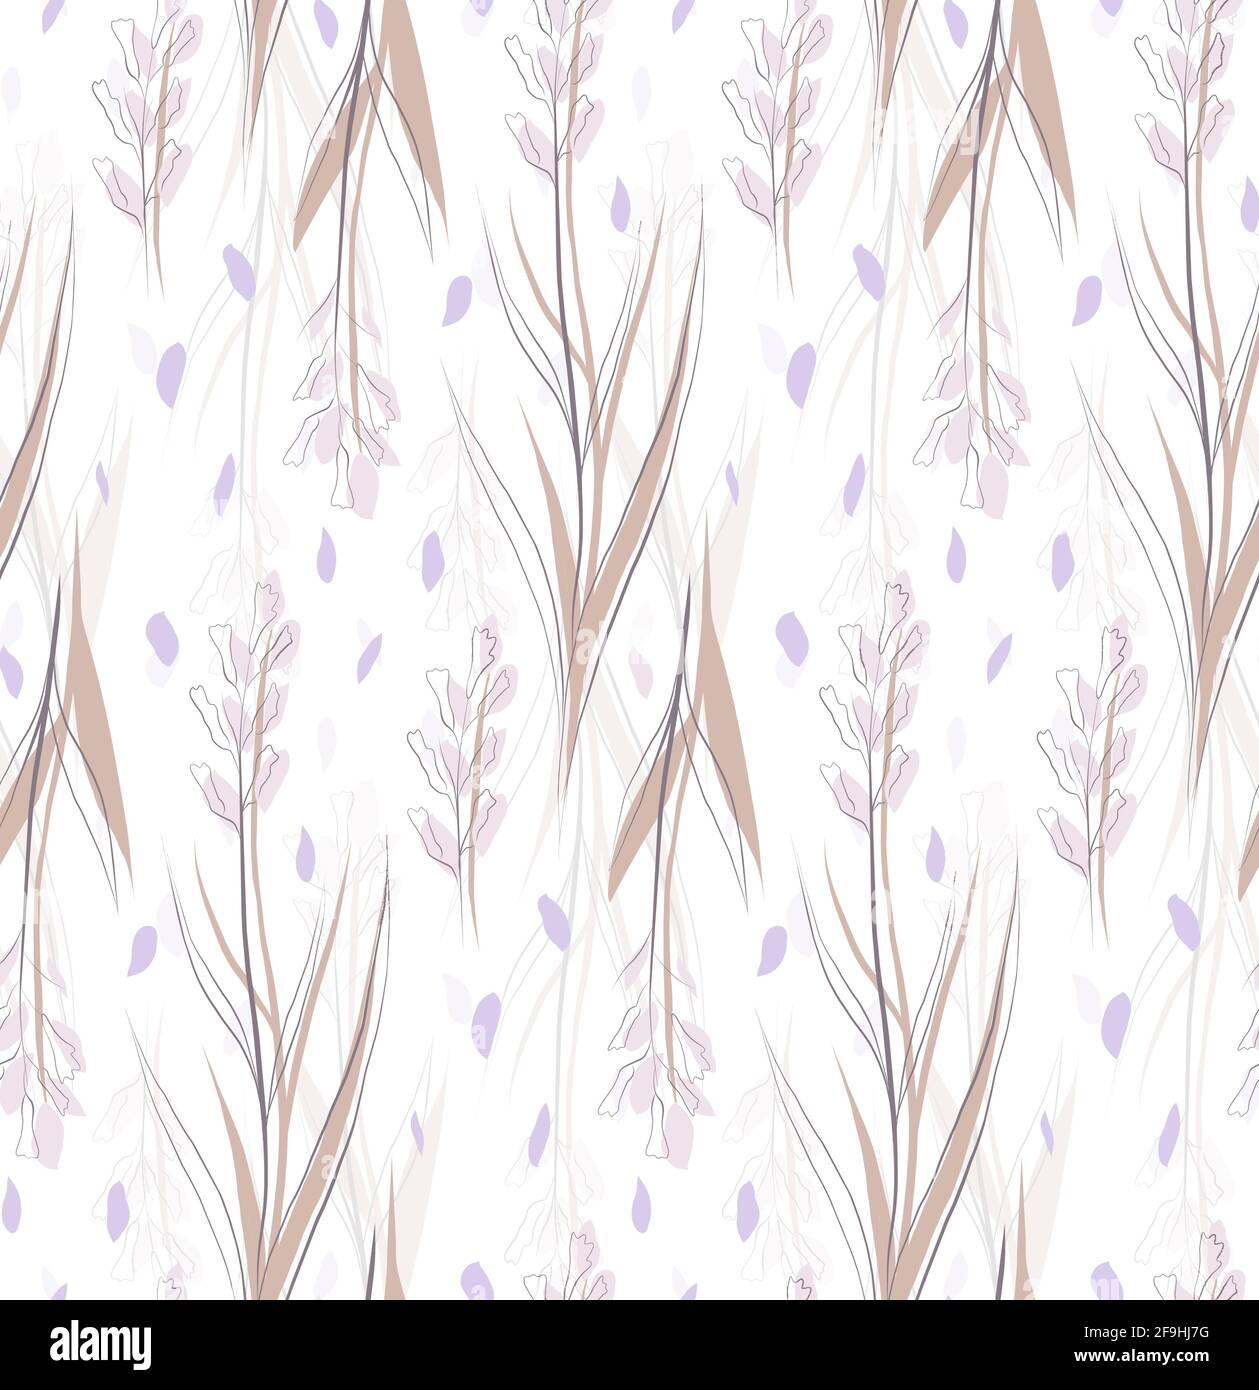 Delicate floral pattern. Wallpaper with hand drawn sketch of flowers with petals on a white background. Vector texture from grass fields. Stock Vector